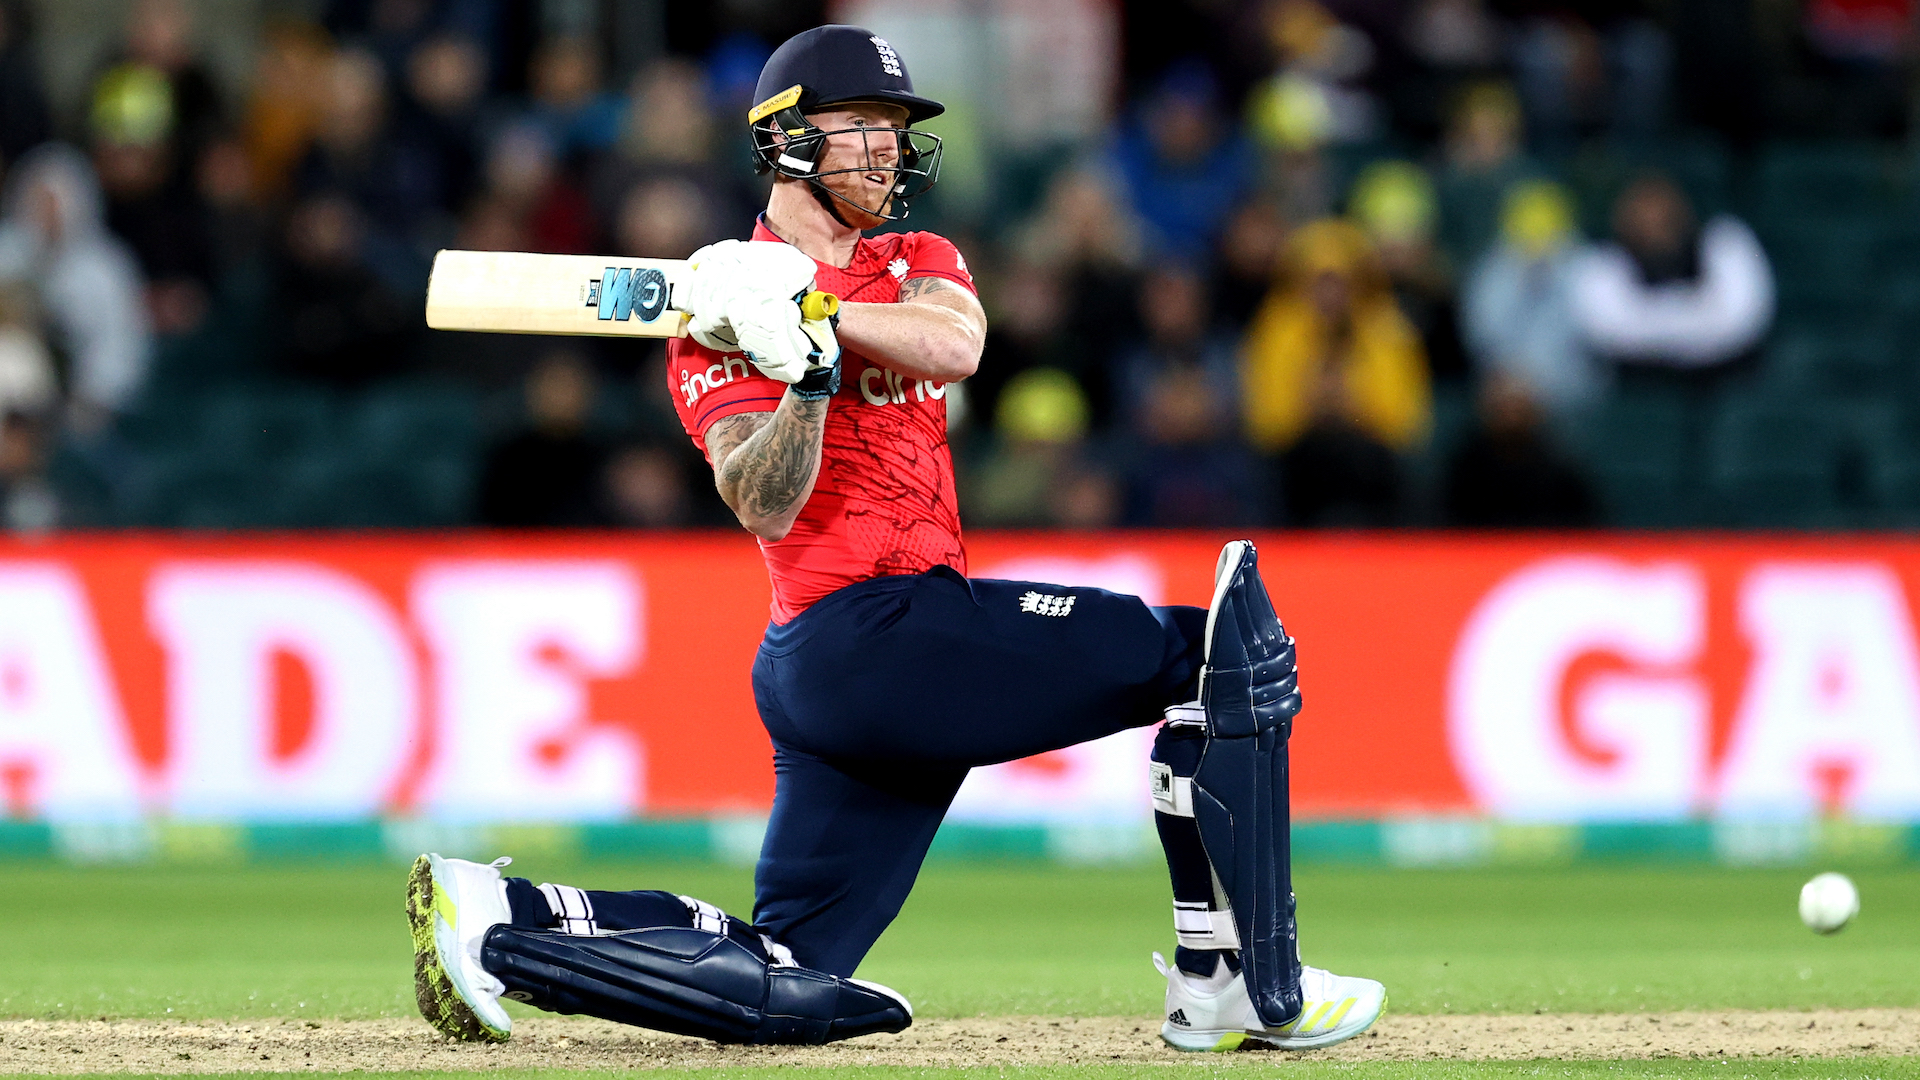 How to watch England vs Afghanistan in the T20 World Cup cricket on a live stream